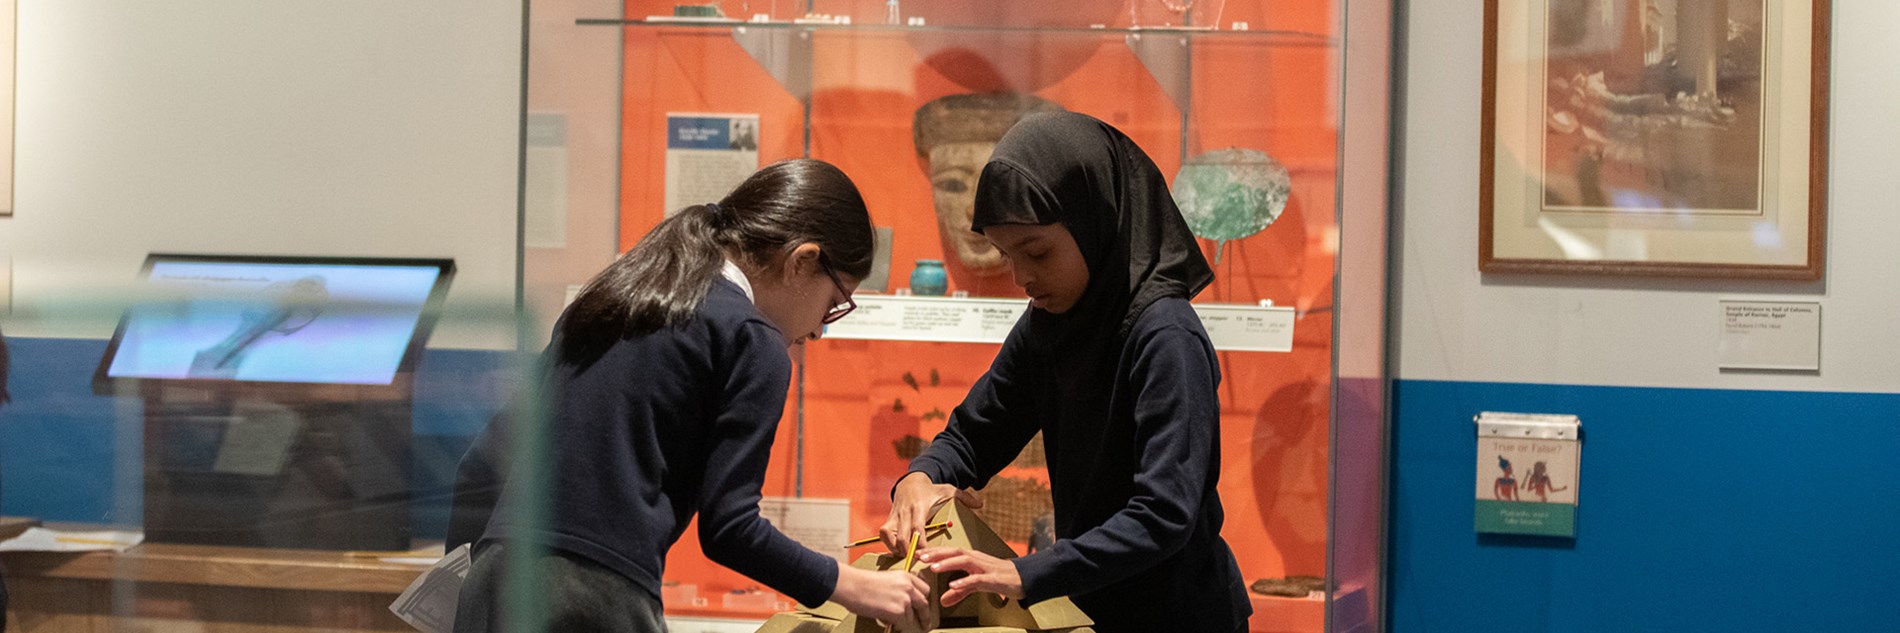 Two primary school students put together a wooden model of a pyramid, in the Ancient Egypt gallery.